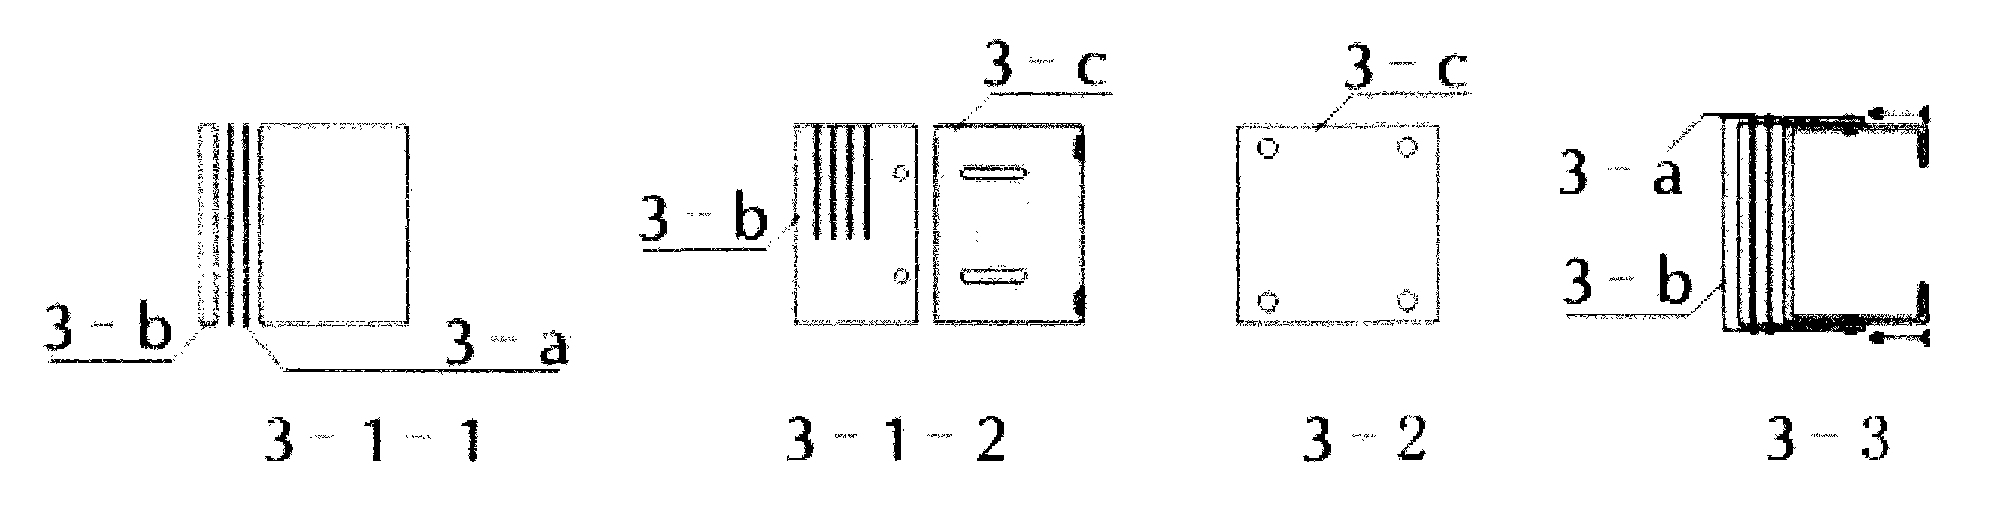 Paper feeding device of embroidery machine